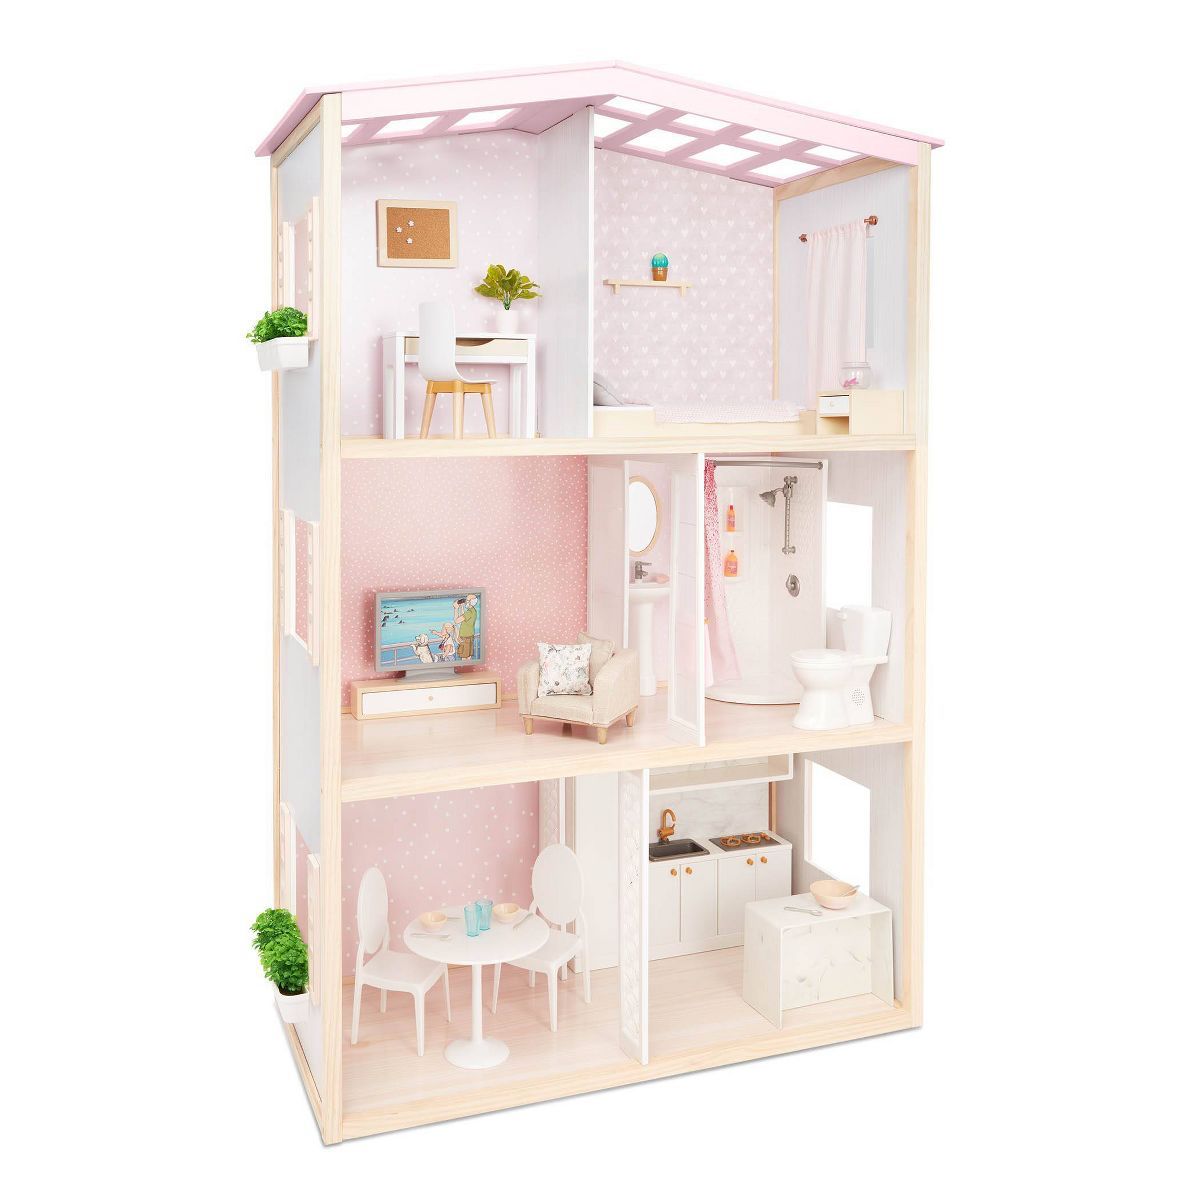 Our Generation Sweet Home Dollhouse & Furniture Playset for 18" Dolls | Target